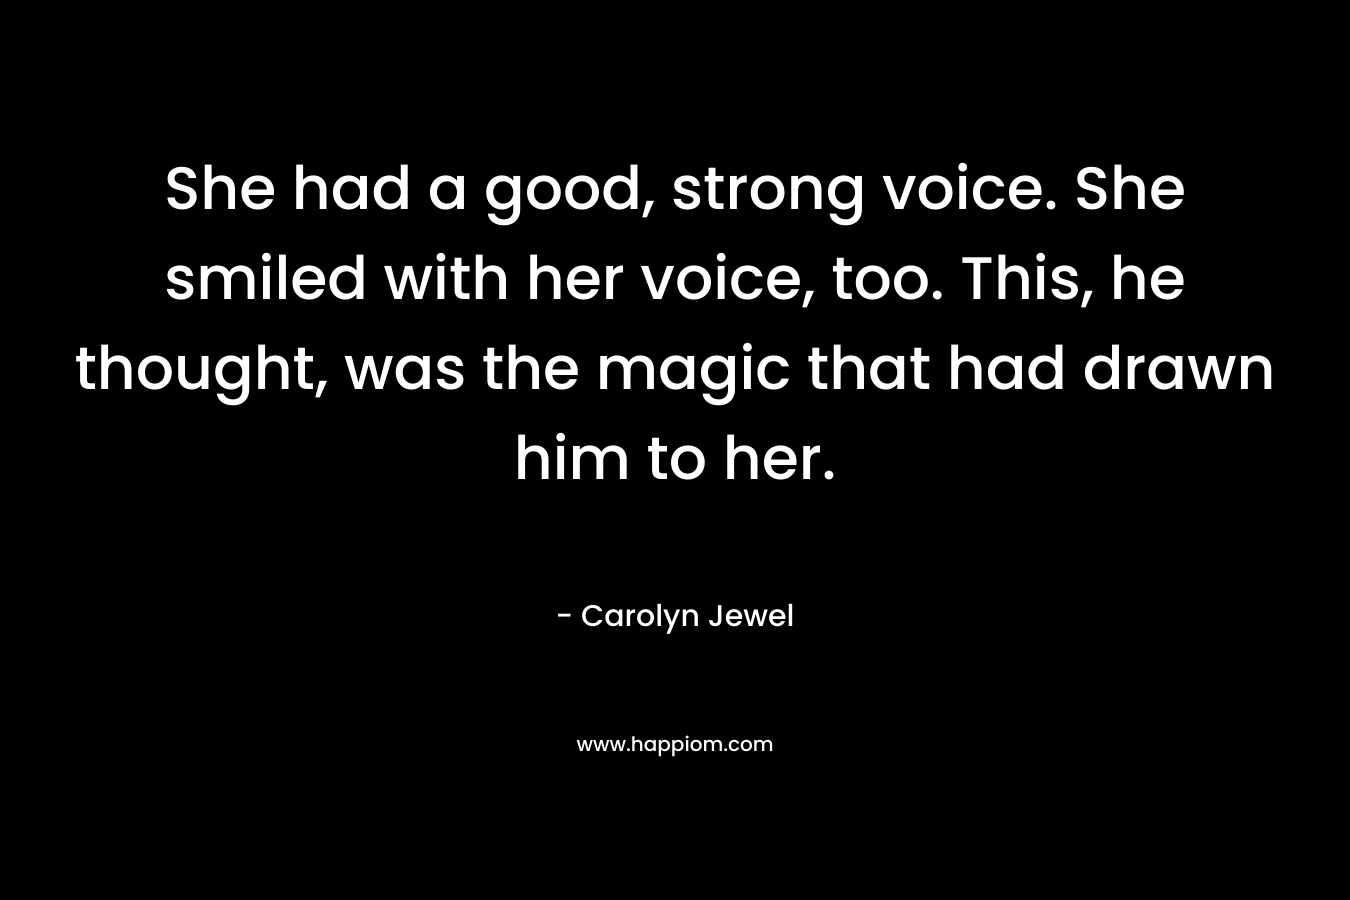 She had a good, strong voice. She smiled with her voice, too. This, he thought, was the magic that had drawn him to her. – Carolyn Jewel